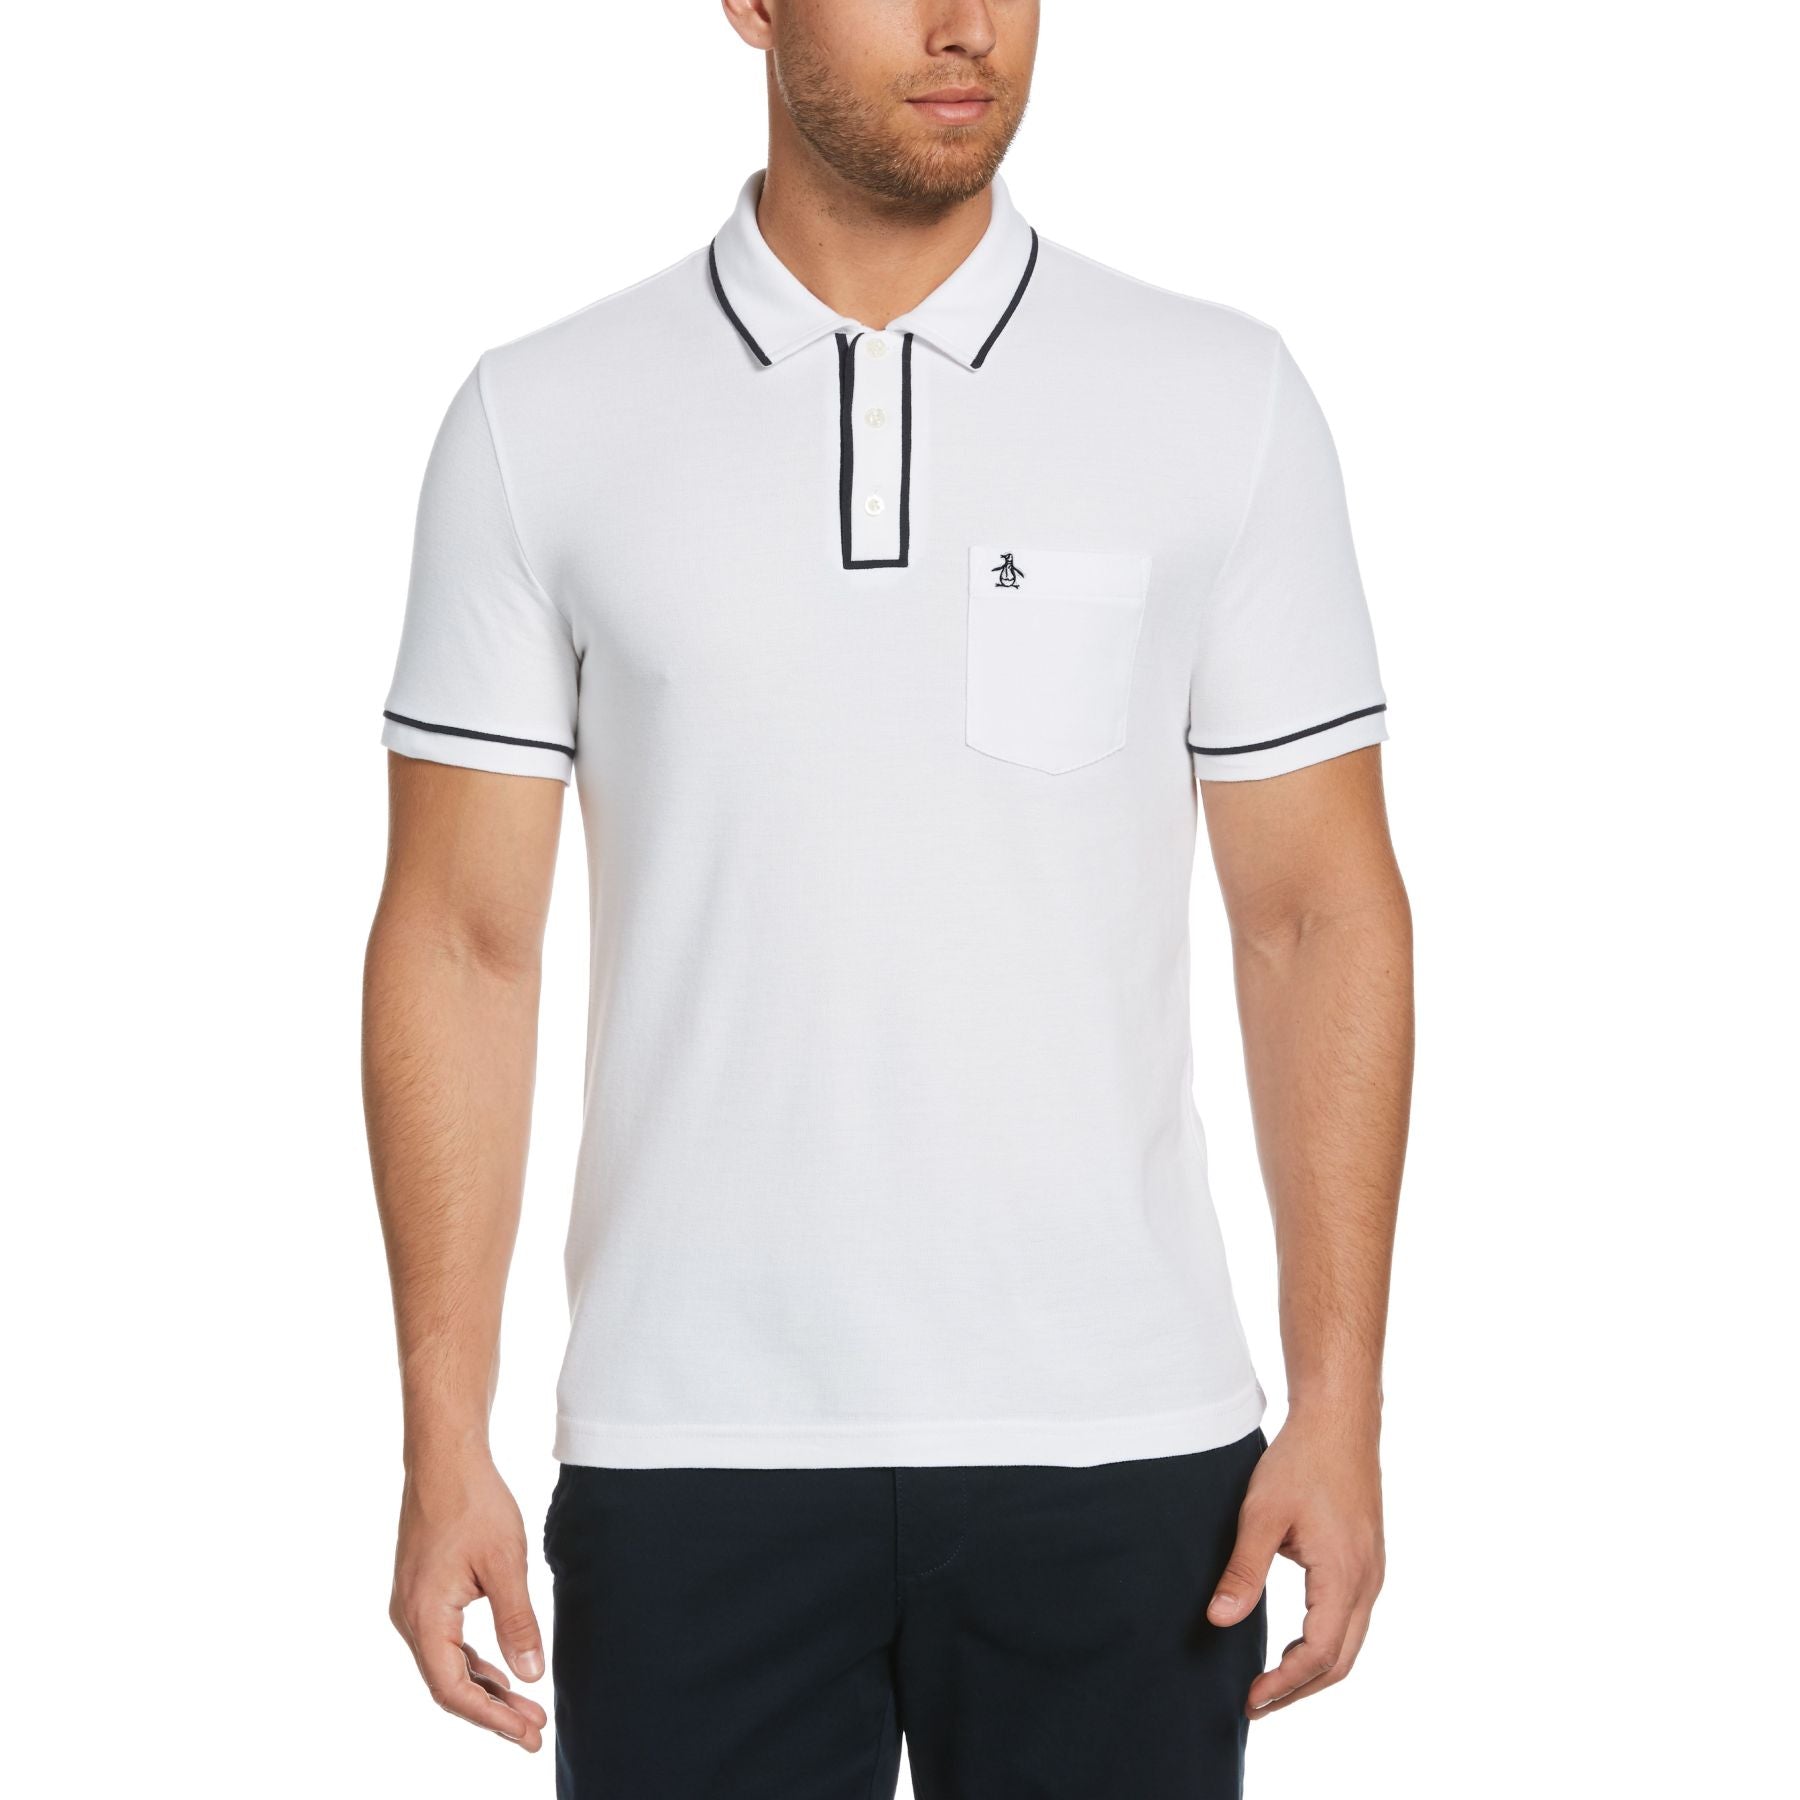 View The Earl Organic Cotton Pique Polo In Bright White information